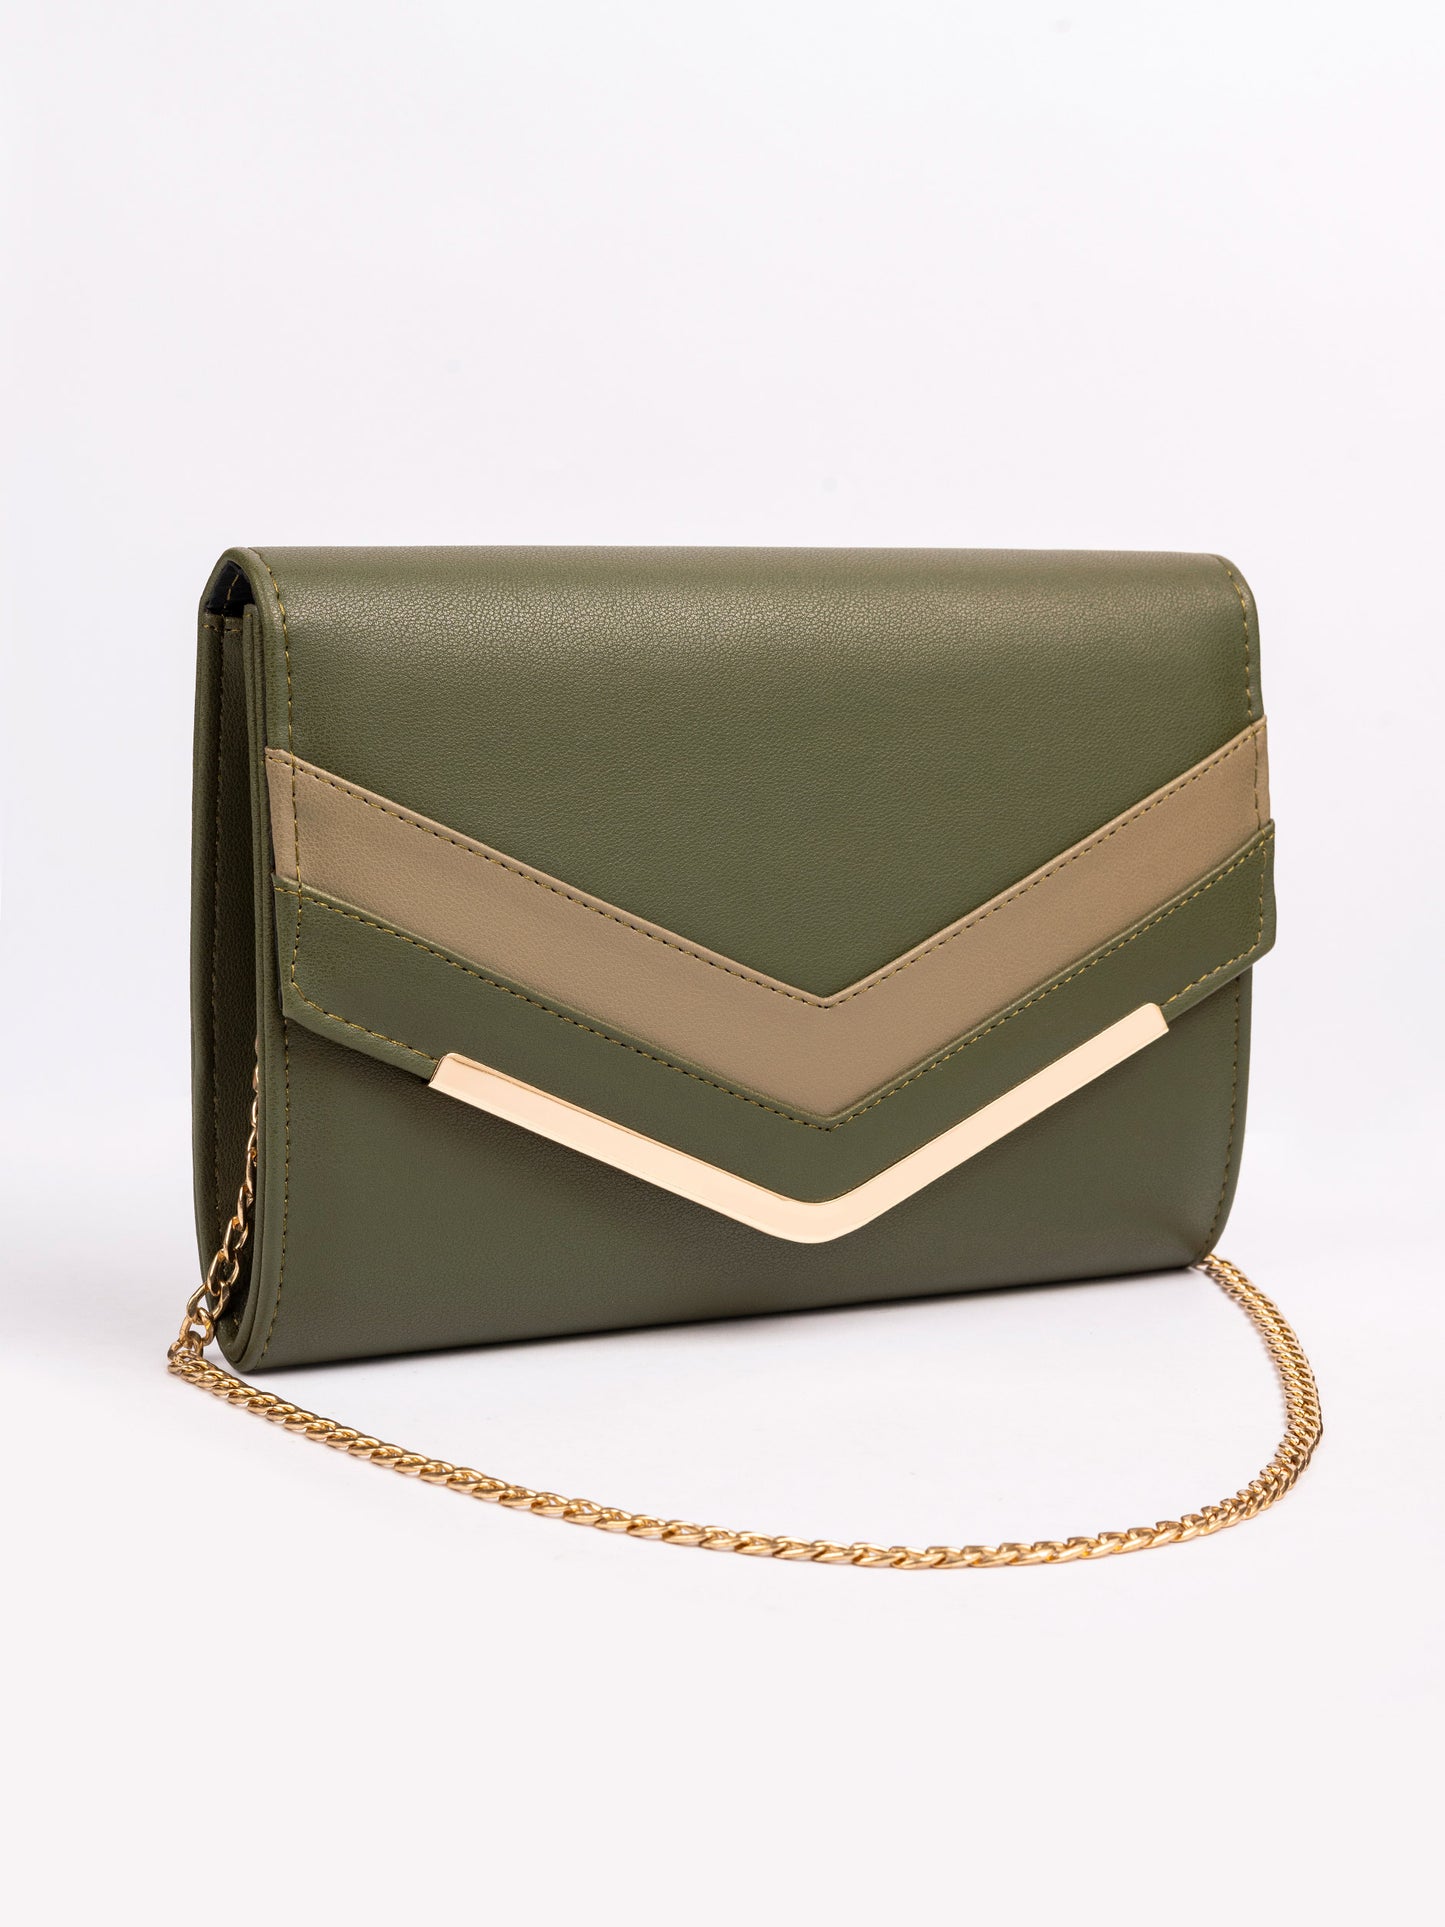 Two Toned Envelope Clutch